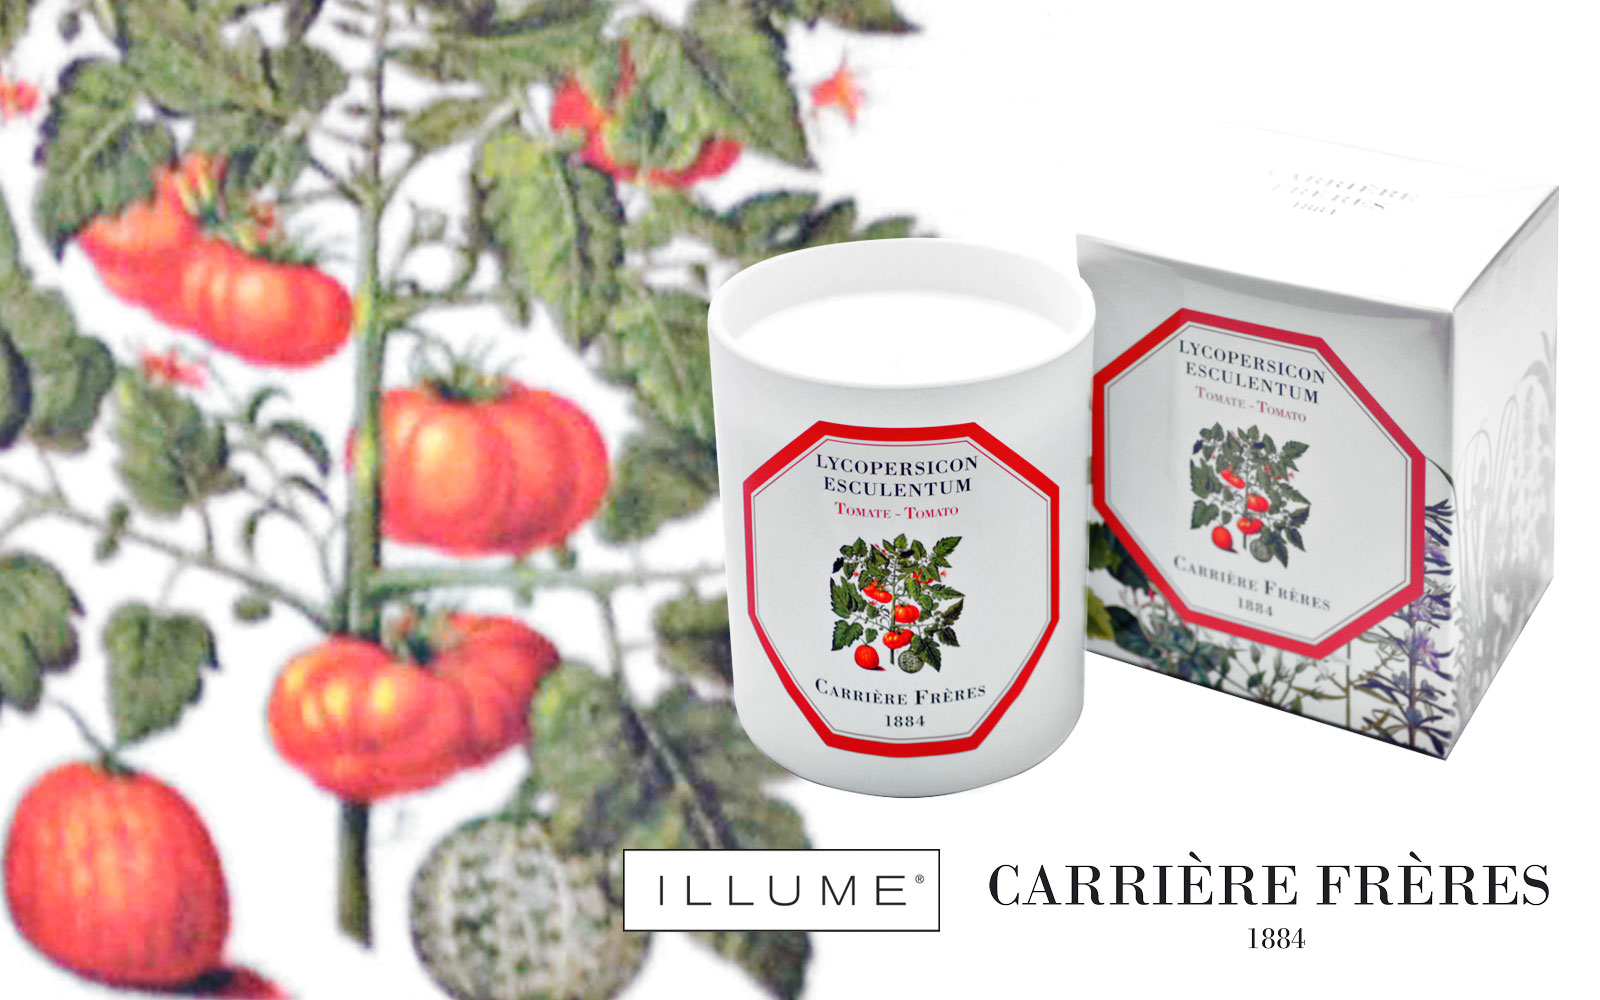 CARRIERE FRERES AND ILLUME　